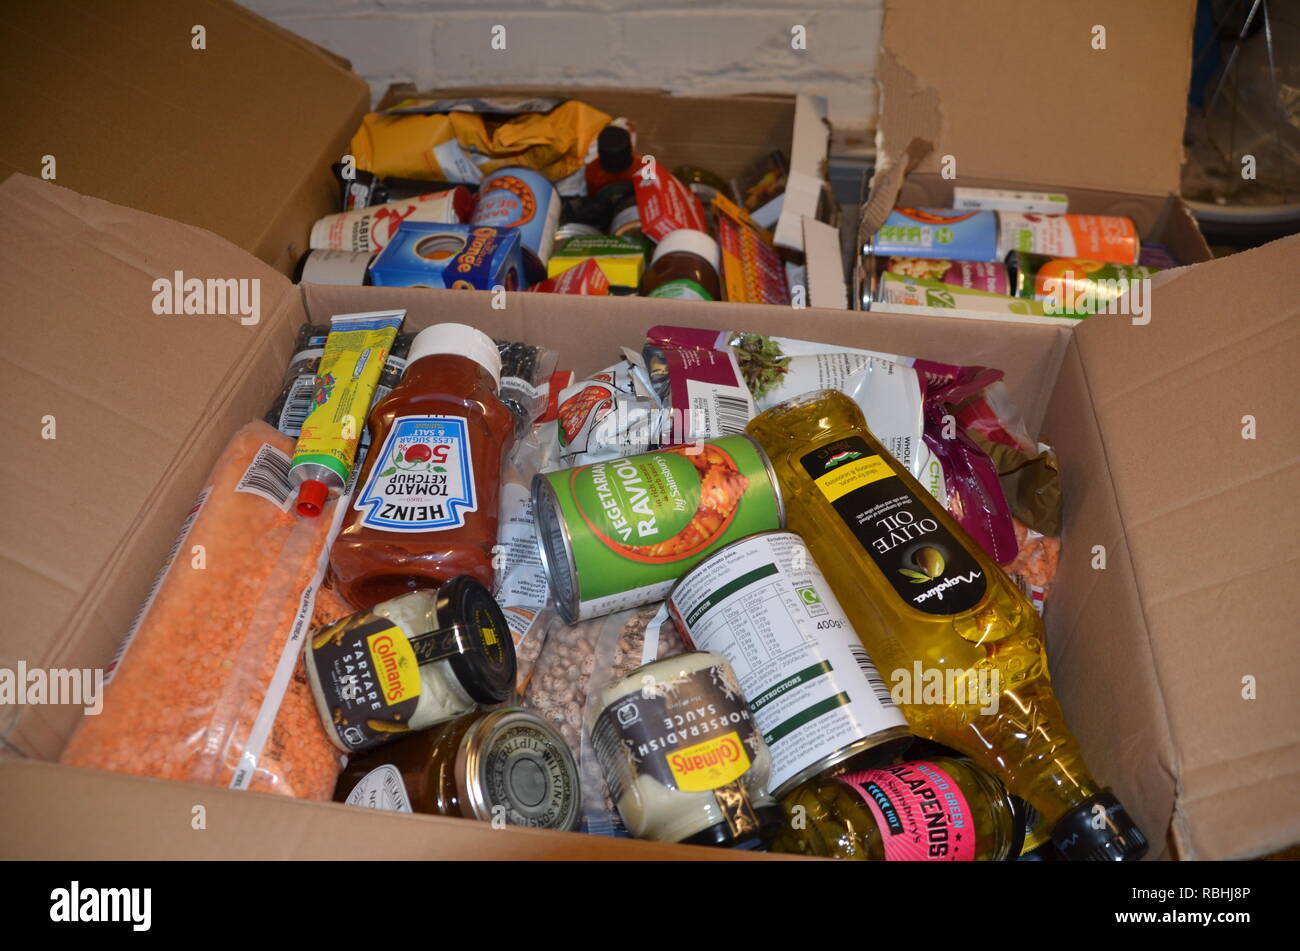 no deal brexit emergency supply boxes in london cellar january 2019 Stock  Photo - Alamy